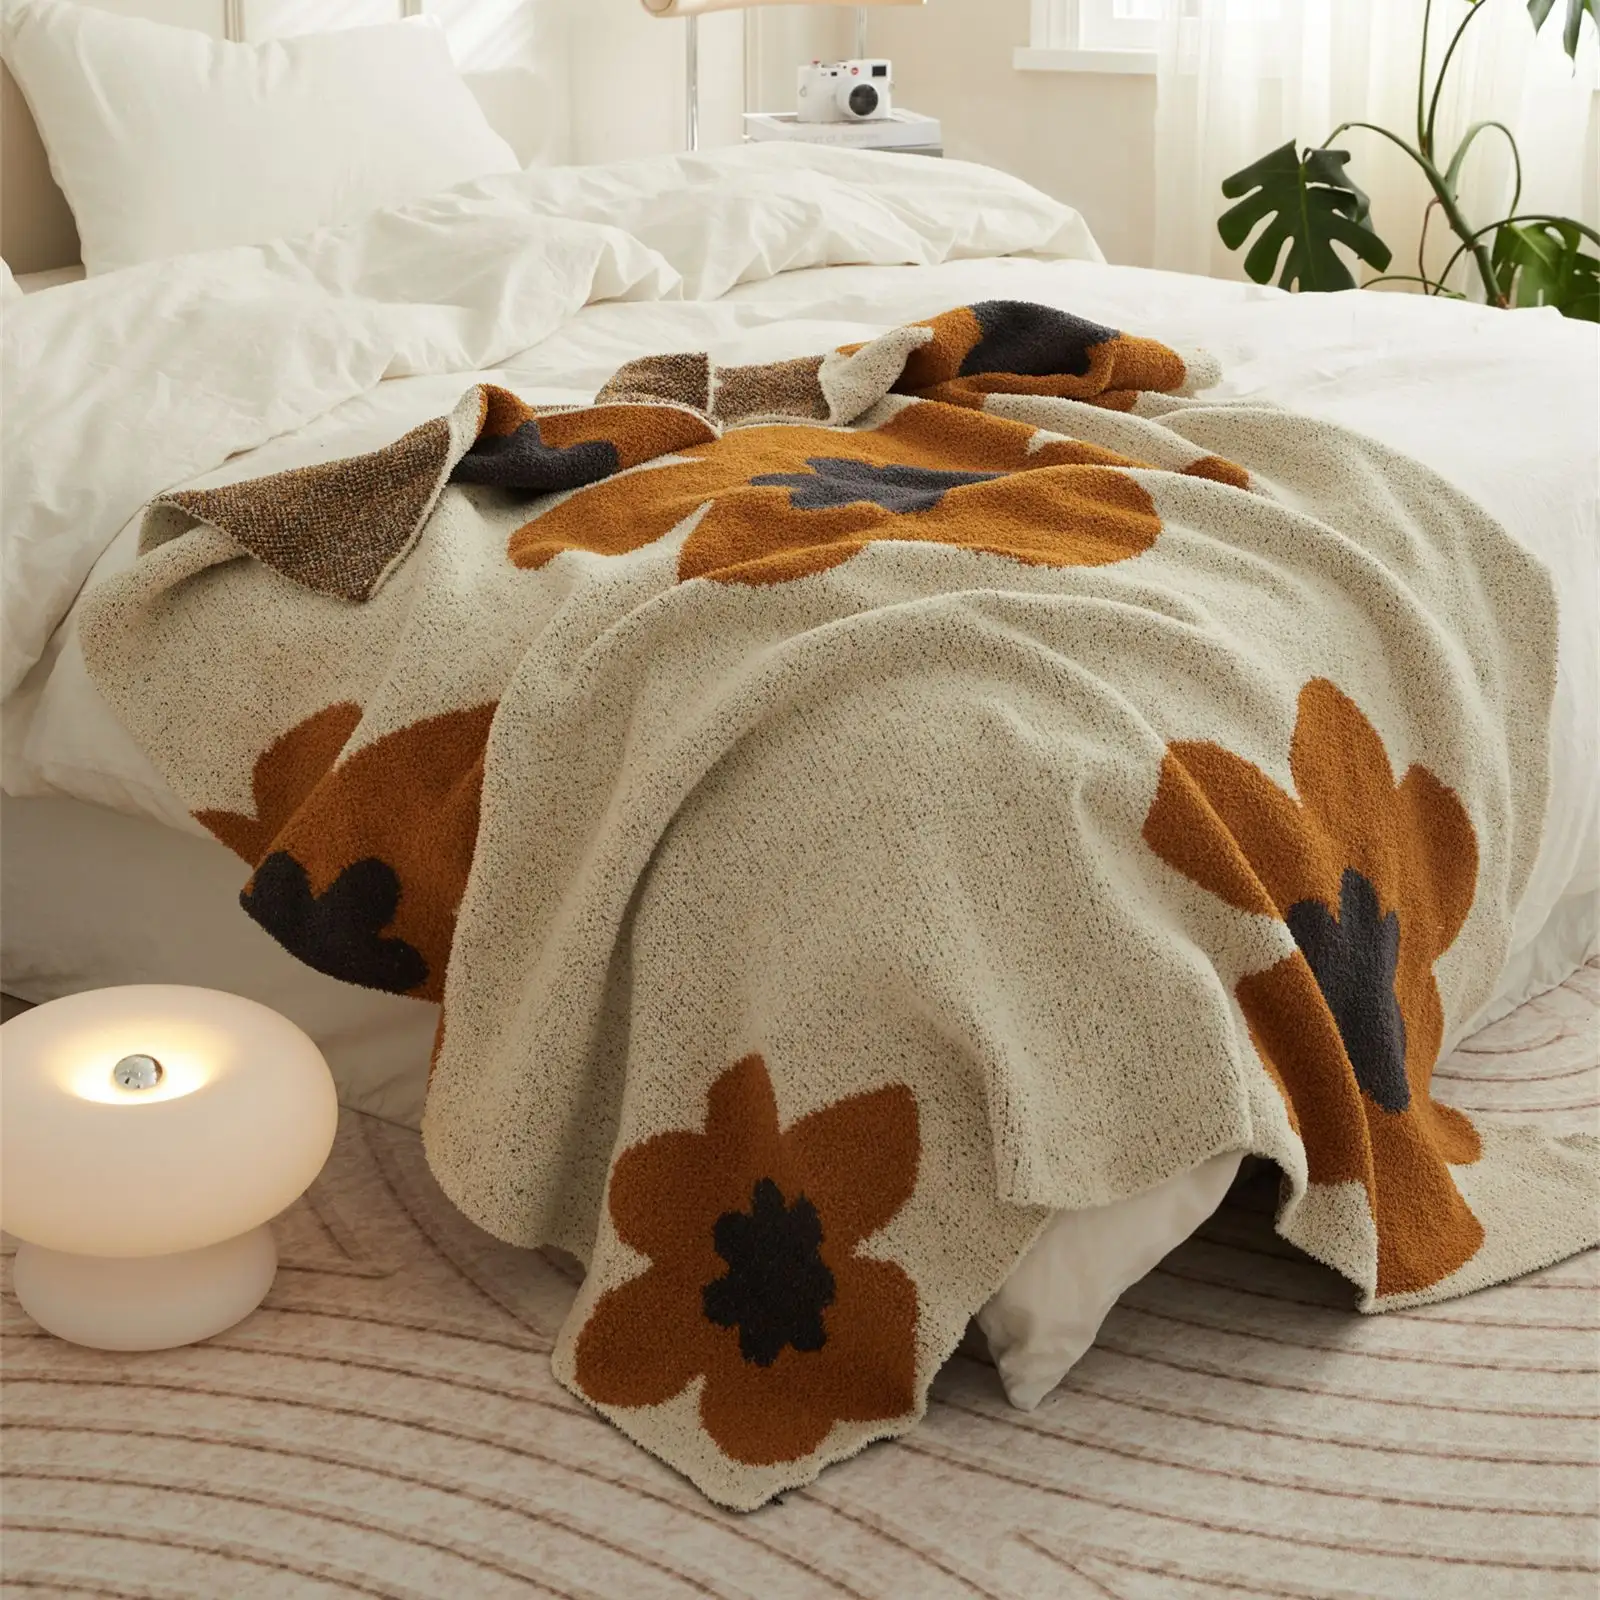 Luxury Designer European and American popular style Warm Crochet Fleece Cozy Knitted Best-selling Flower Blanket Throws For Baby